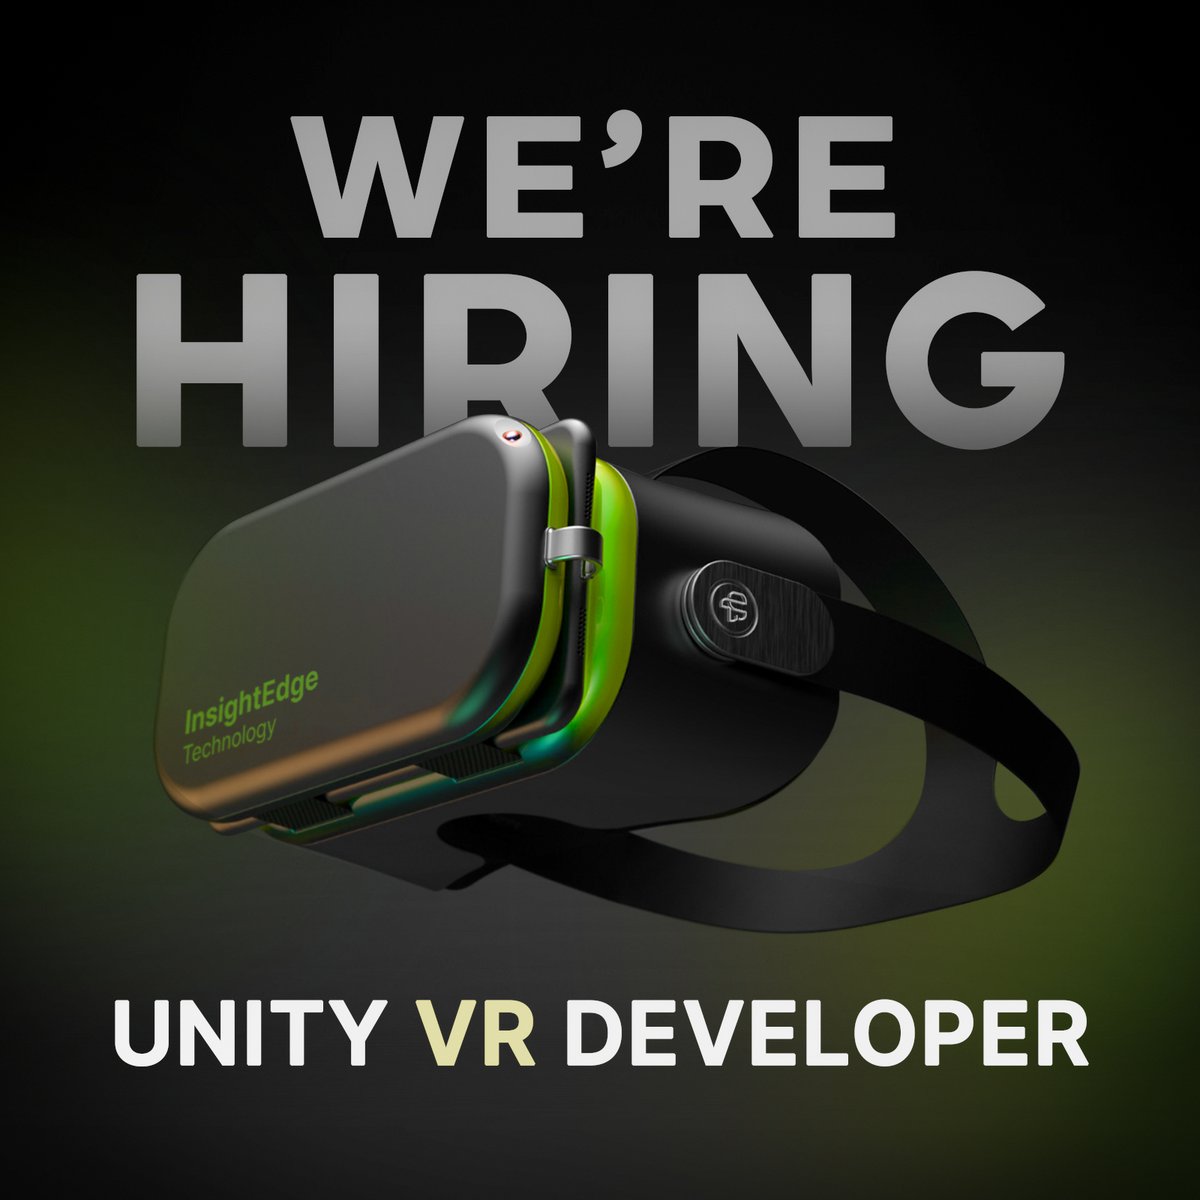 🚀 Join us in shaping the future of VR! We're hiring a Unity VR Developer. If you're passionate about immersive experiences, apply now! Apply now and be a key player in shaping the future of immersive technology. #VRDeveloper #UnityJobs #VirtualReality #MixedReality